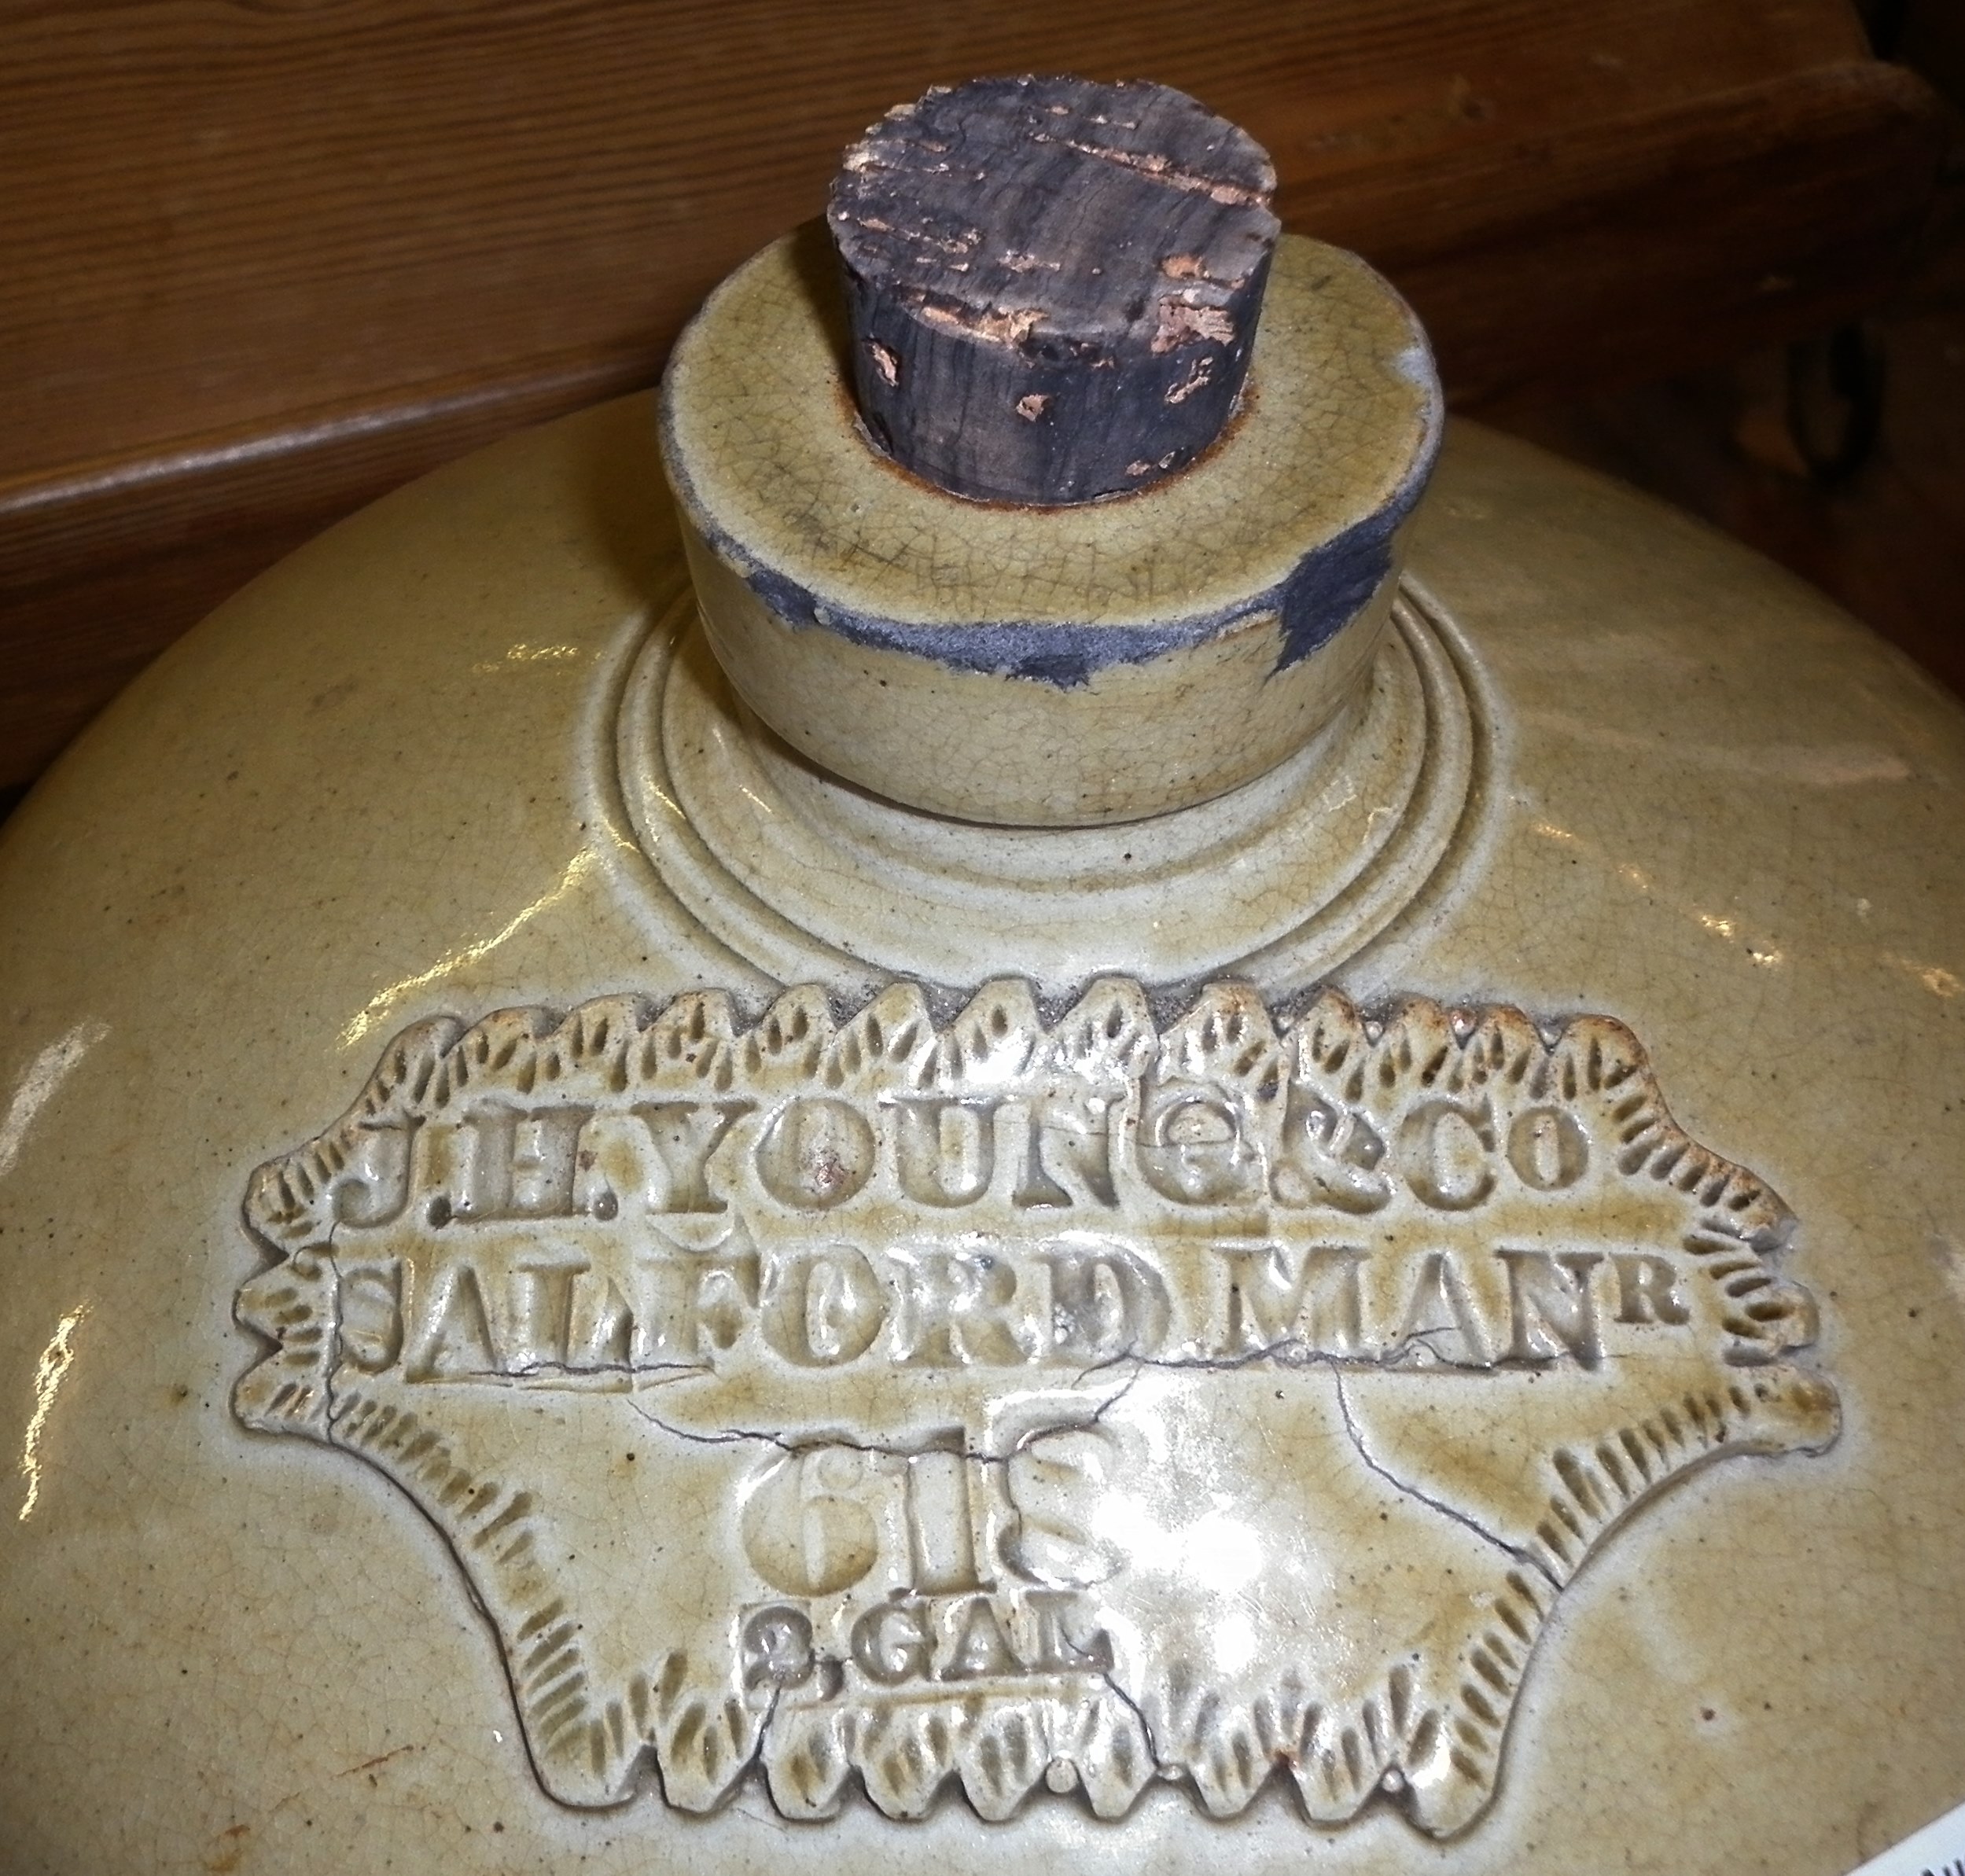 Large stoneware flagon with impressed legend, "J.H. YOUNG & CO. SALFORD MANR, 618 2GAL", c. 1850's - Image 2 of 2